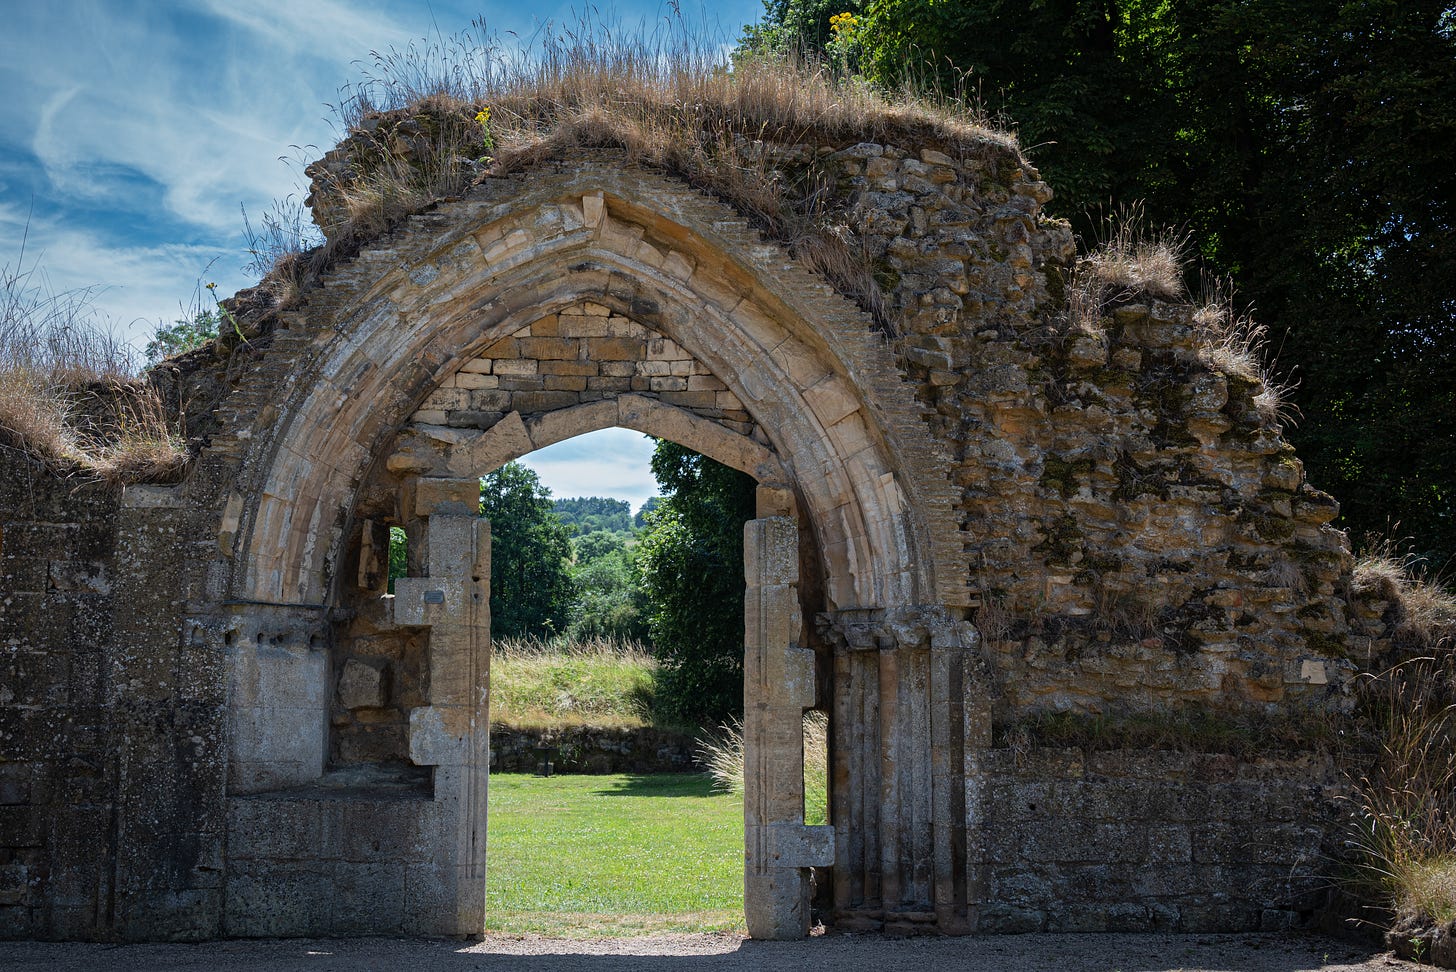 A doorway in the ancient Hailles Abbey in England. Only fragments of the structure remain including this one archway and door looking out at the Cotswold landscape